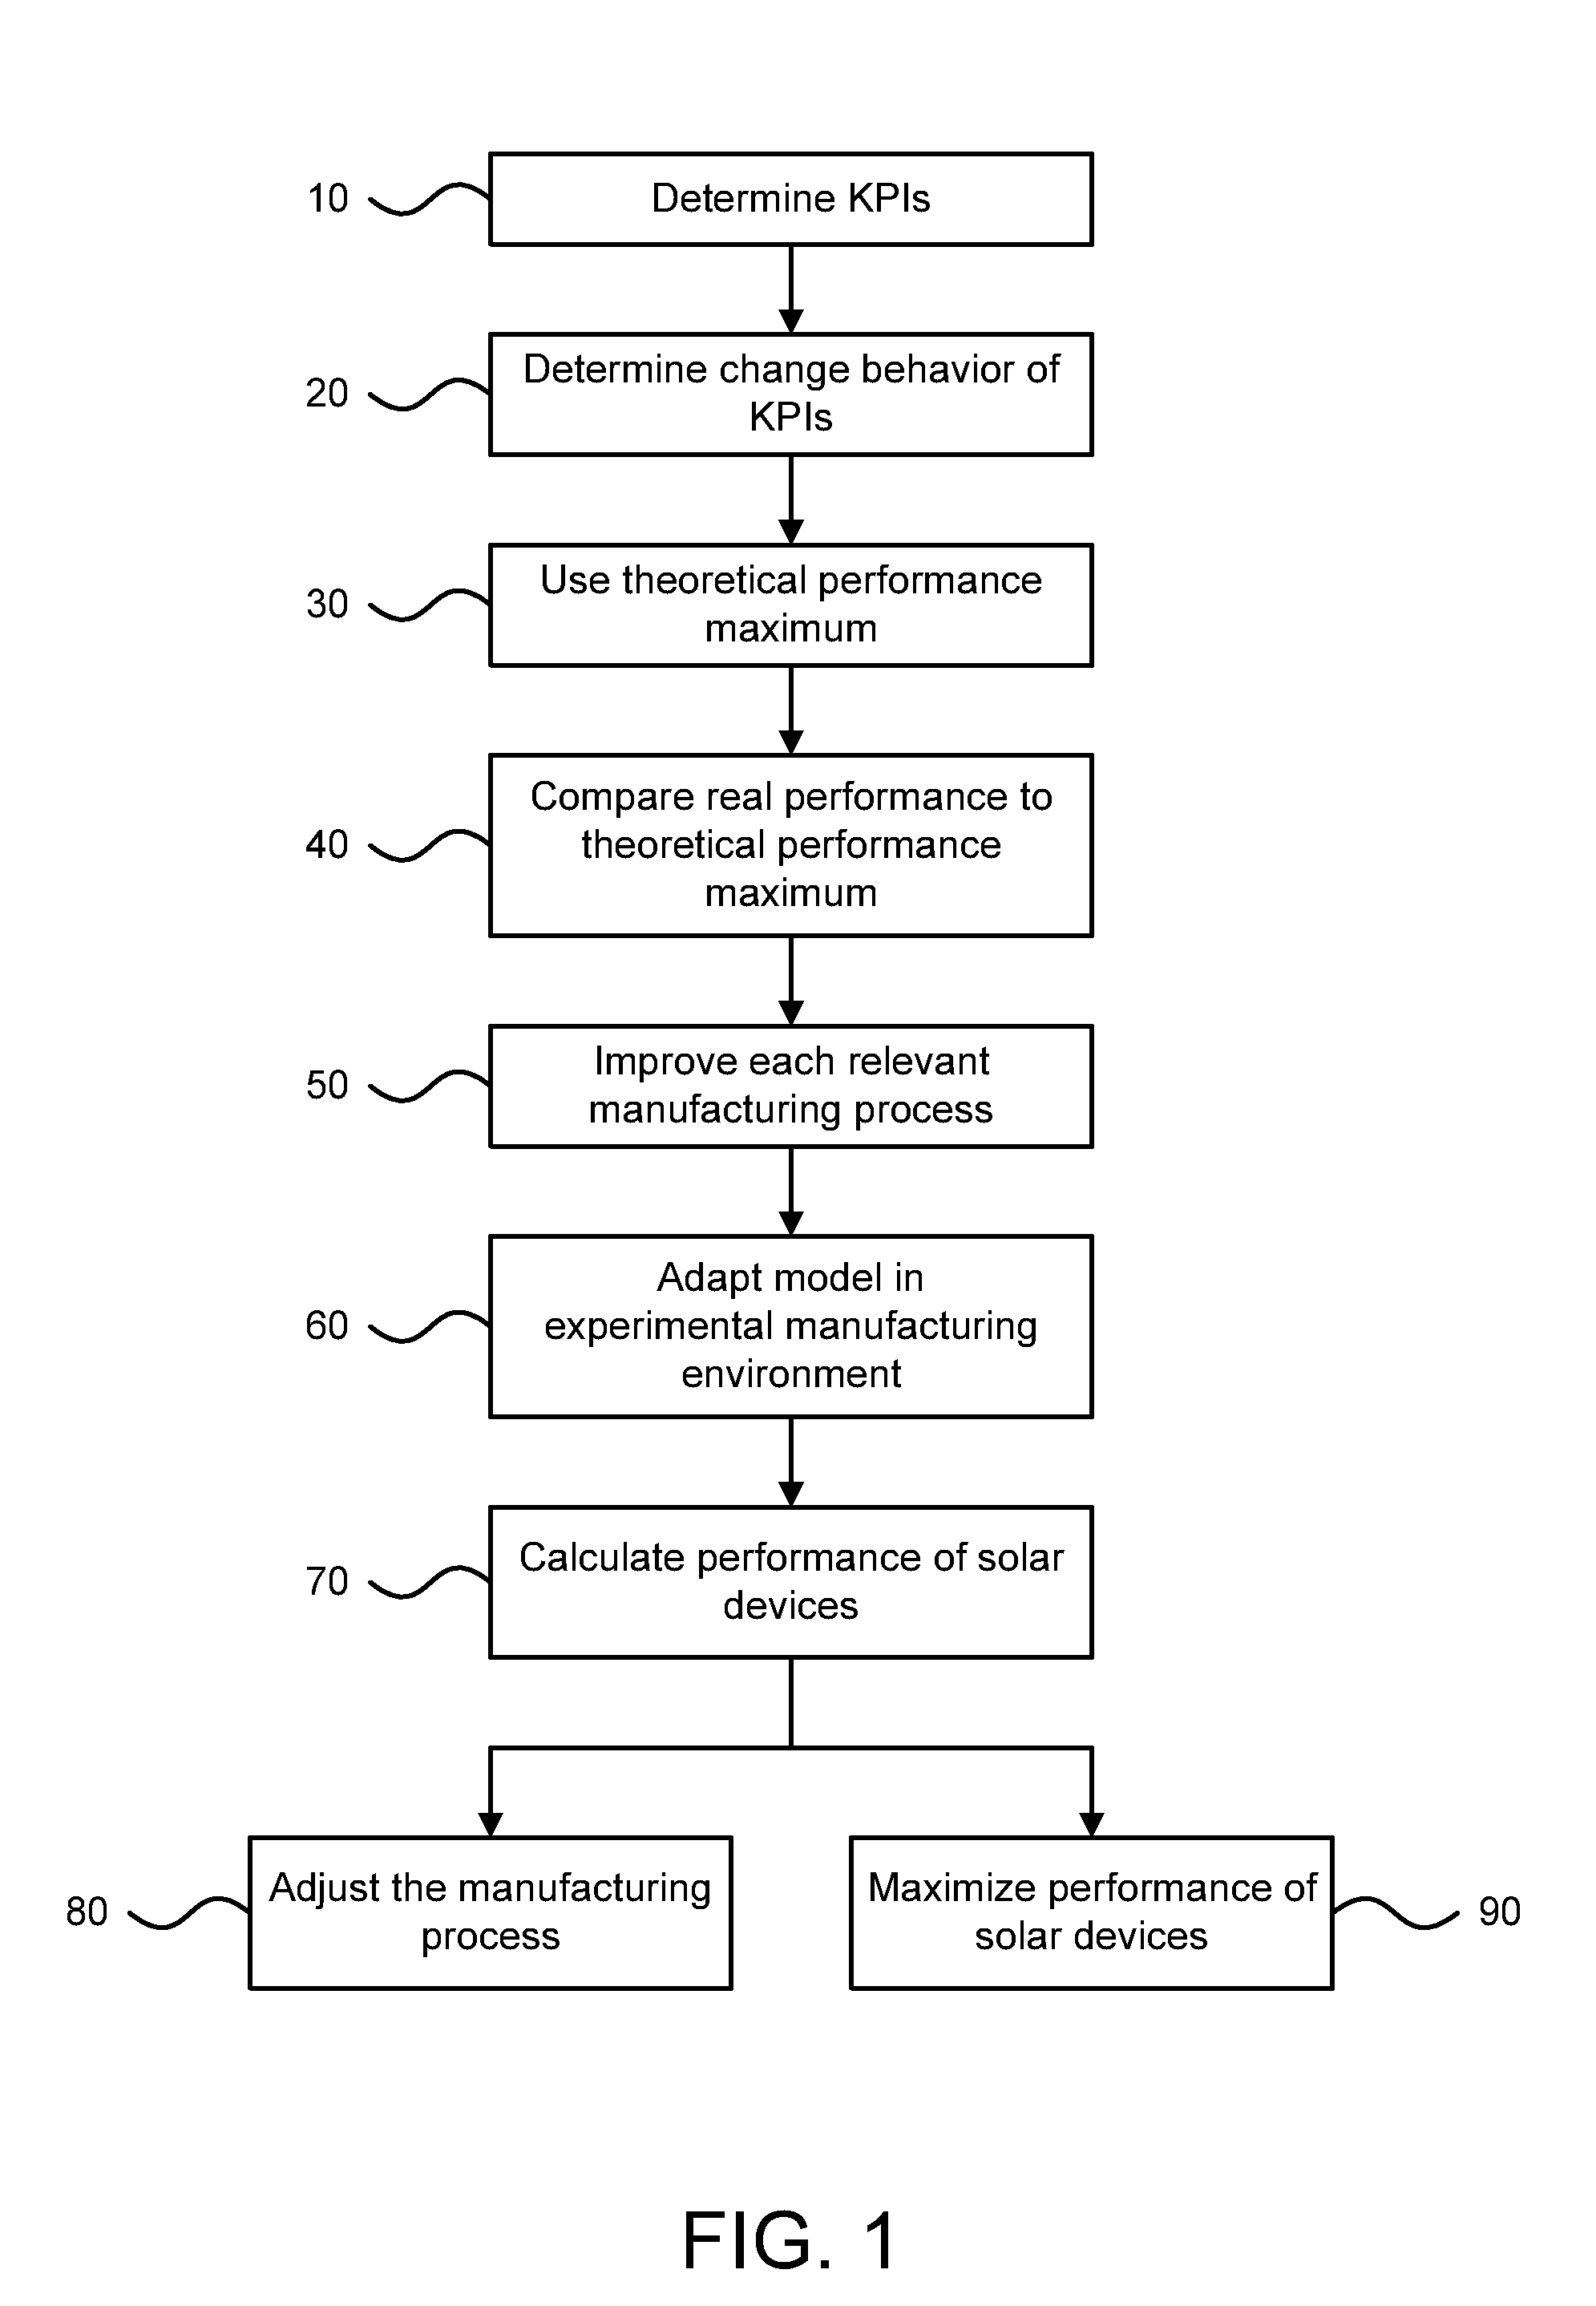 Managing a performance of solar devices throughout an end-to-end manufacturing process